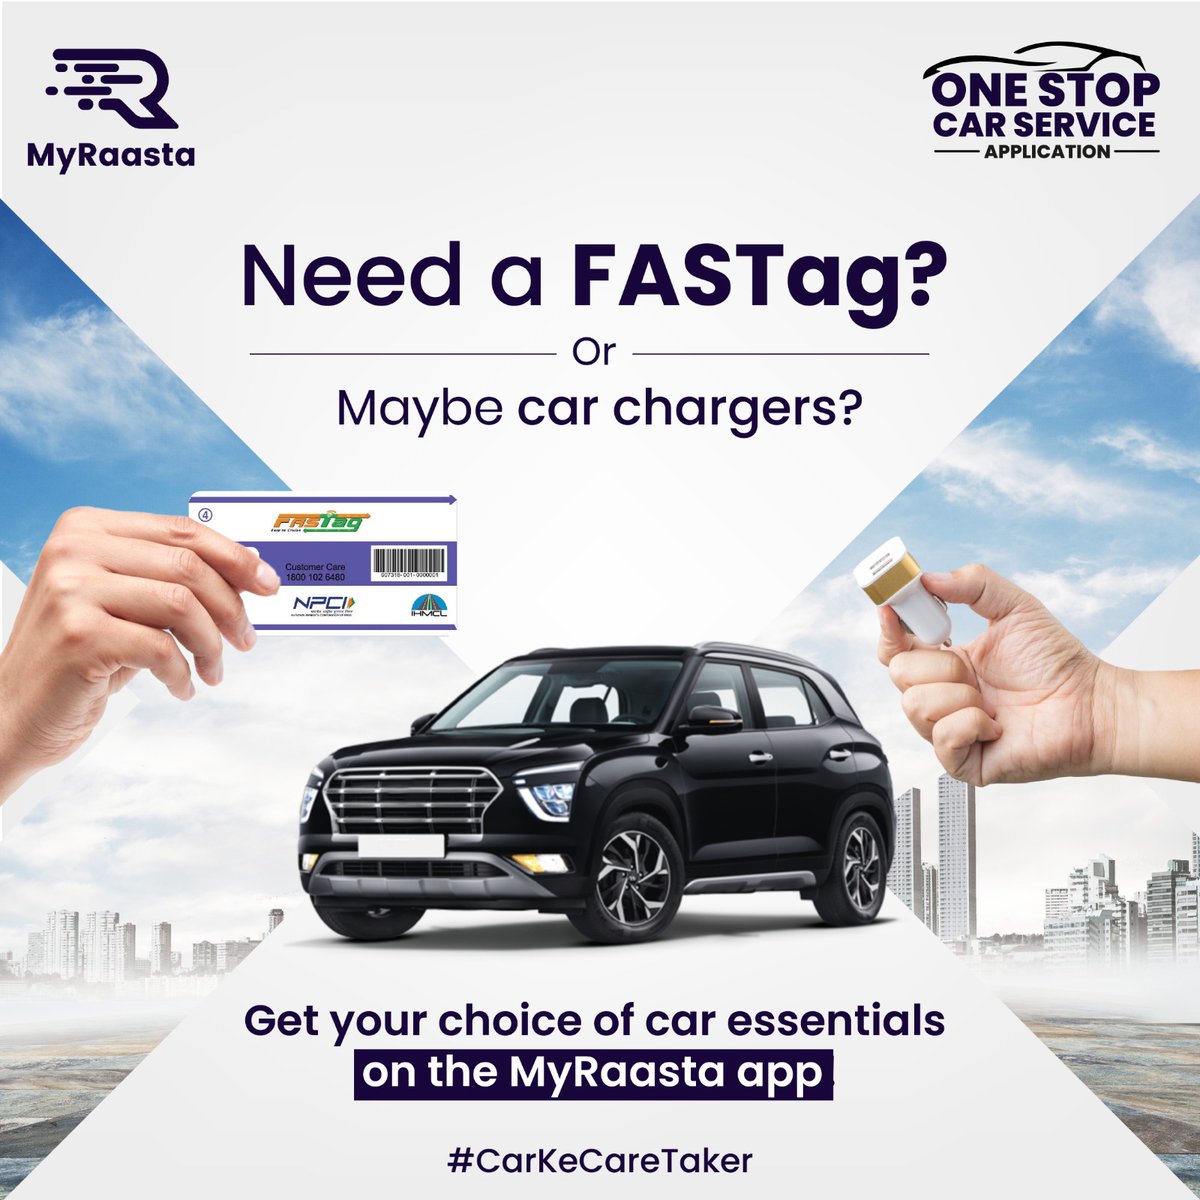 Get FASTag, Number Plate Frames, USB Car Chargers and Cables, Tyre Inflators, Liquid Wax, and a lot more on the MyRaasta app now!
.
.
.
.
.
.
.
#myraasta #myraastacarservice #carassistance  #fastag #tyre #carservices #learn #car #carserviceshop #carworkshop #myraasta #myraastapp